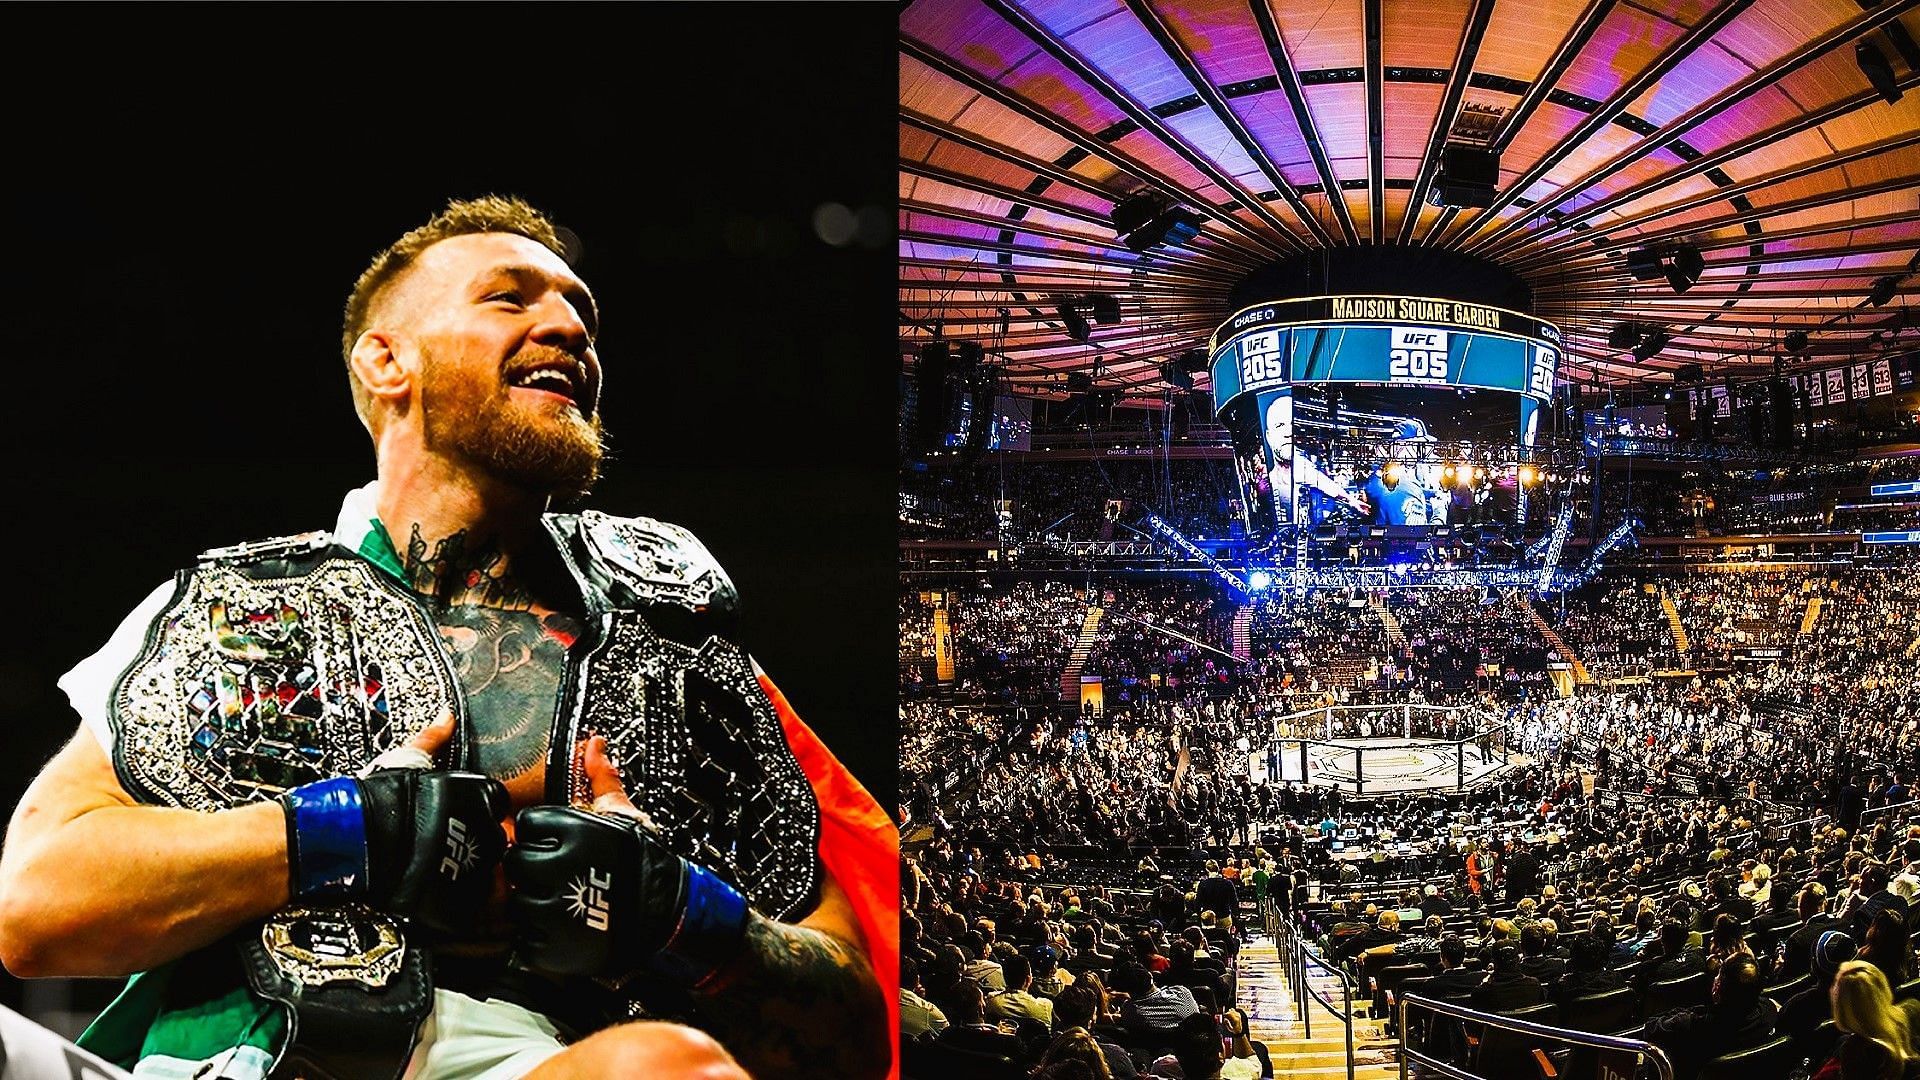 Conor McGregor (left) and MSG (right) [Images via @themaclife &amp; @ufc on Instagram]